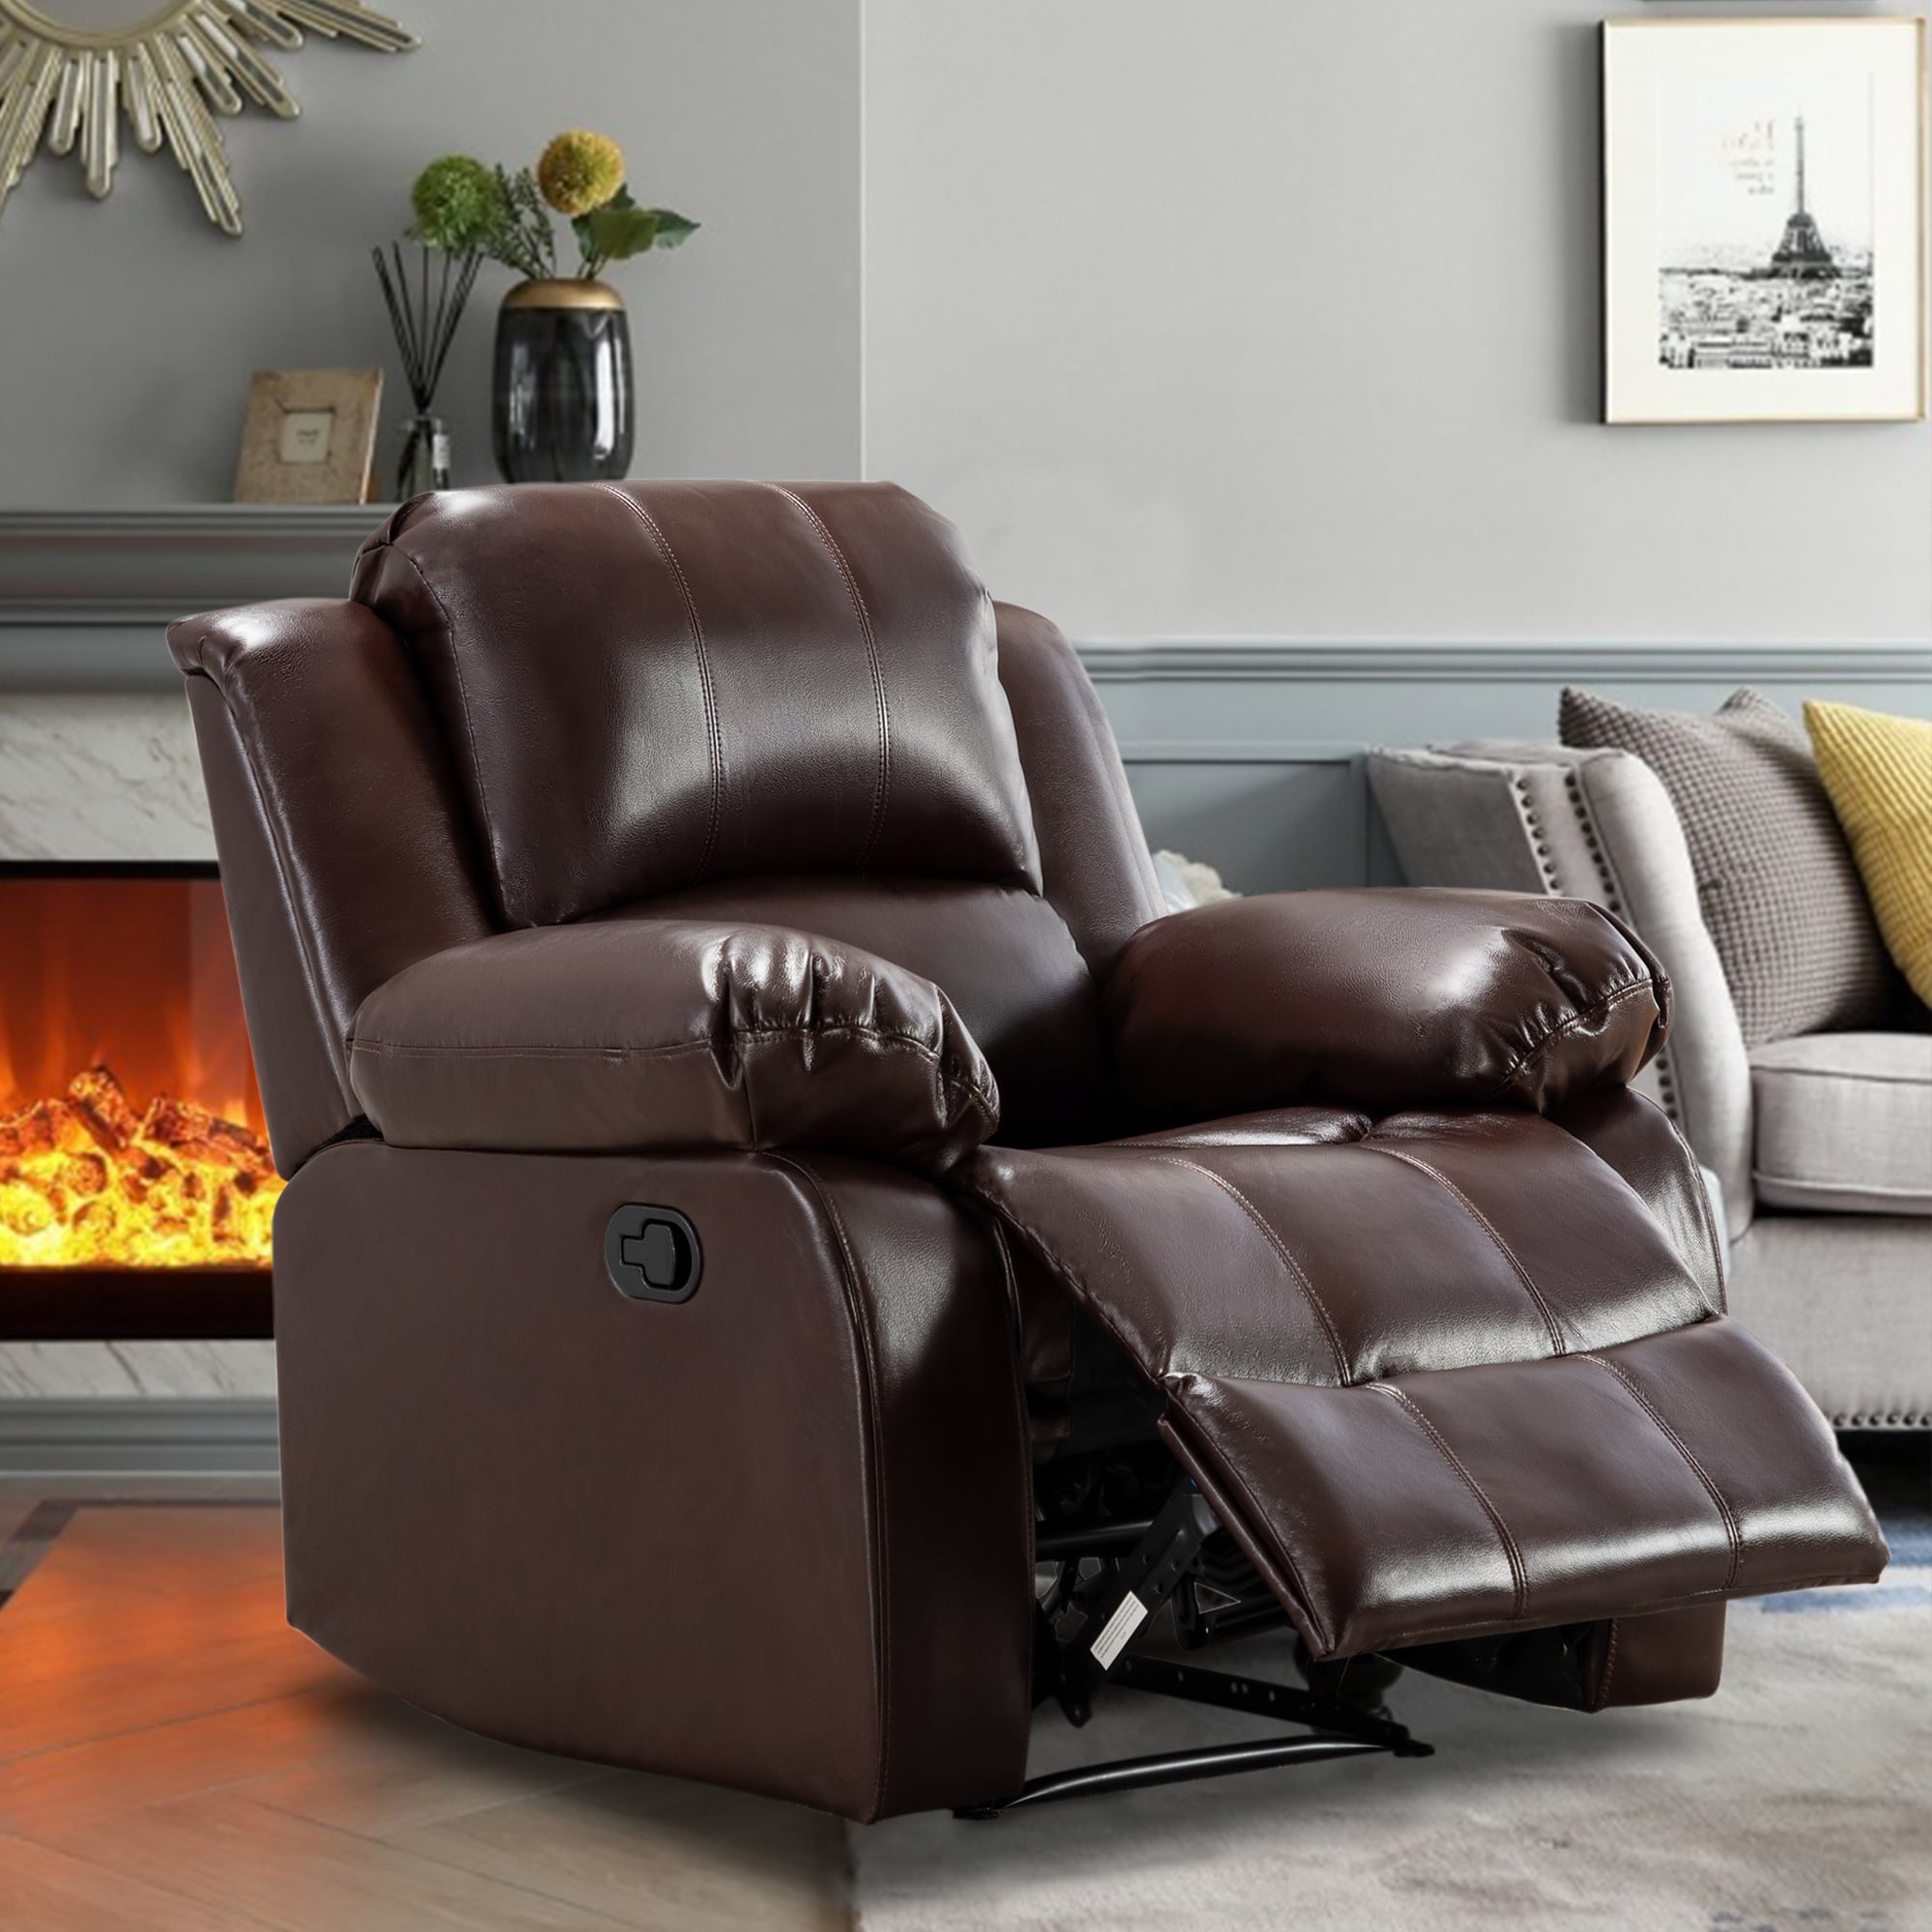 Comforable Recliner Sofa for Living Room, Single Tufted Reclining Chair